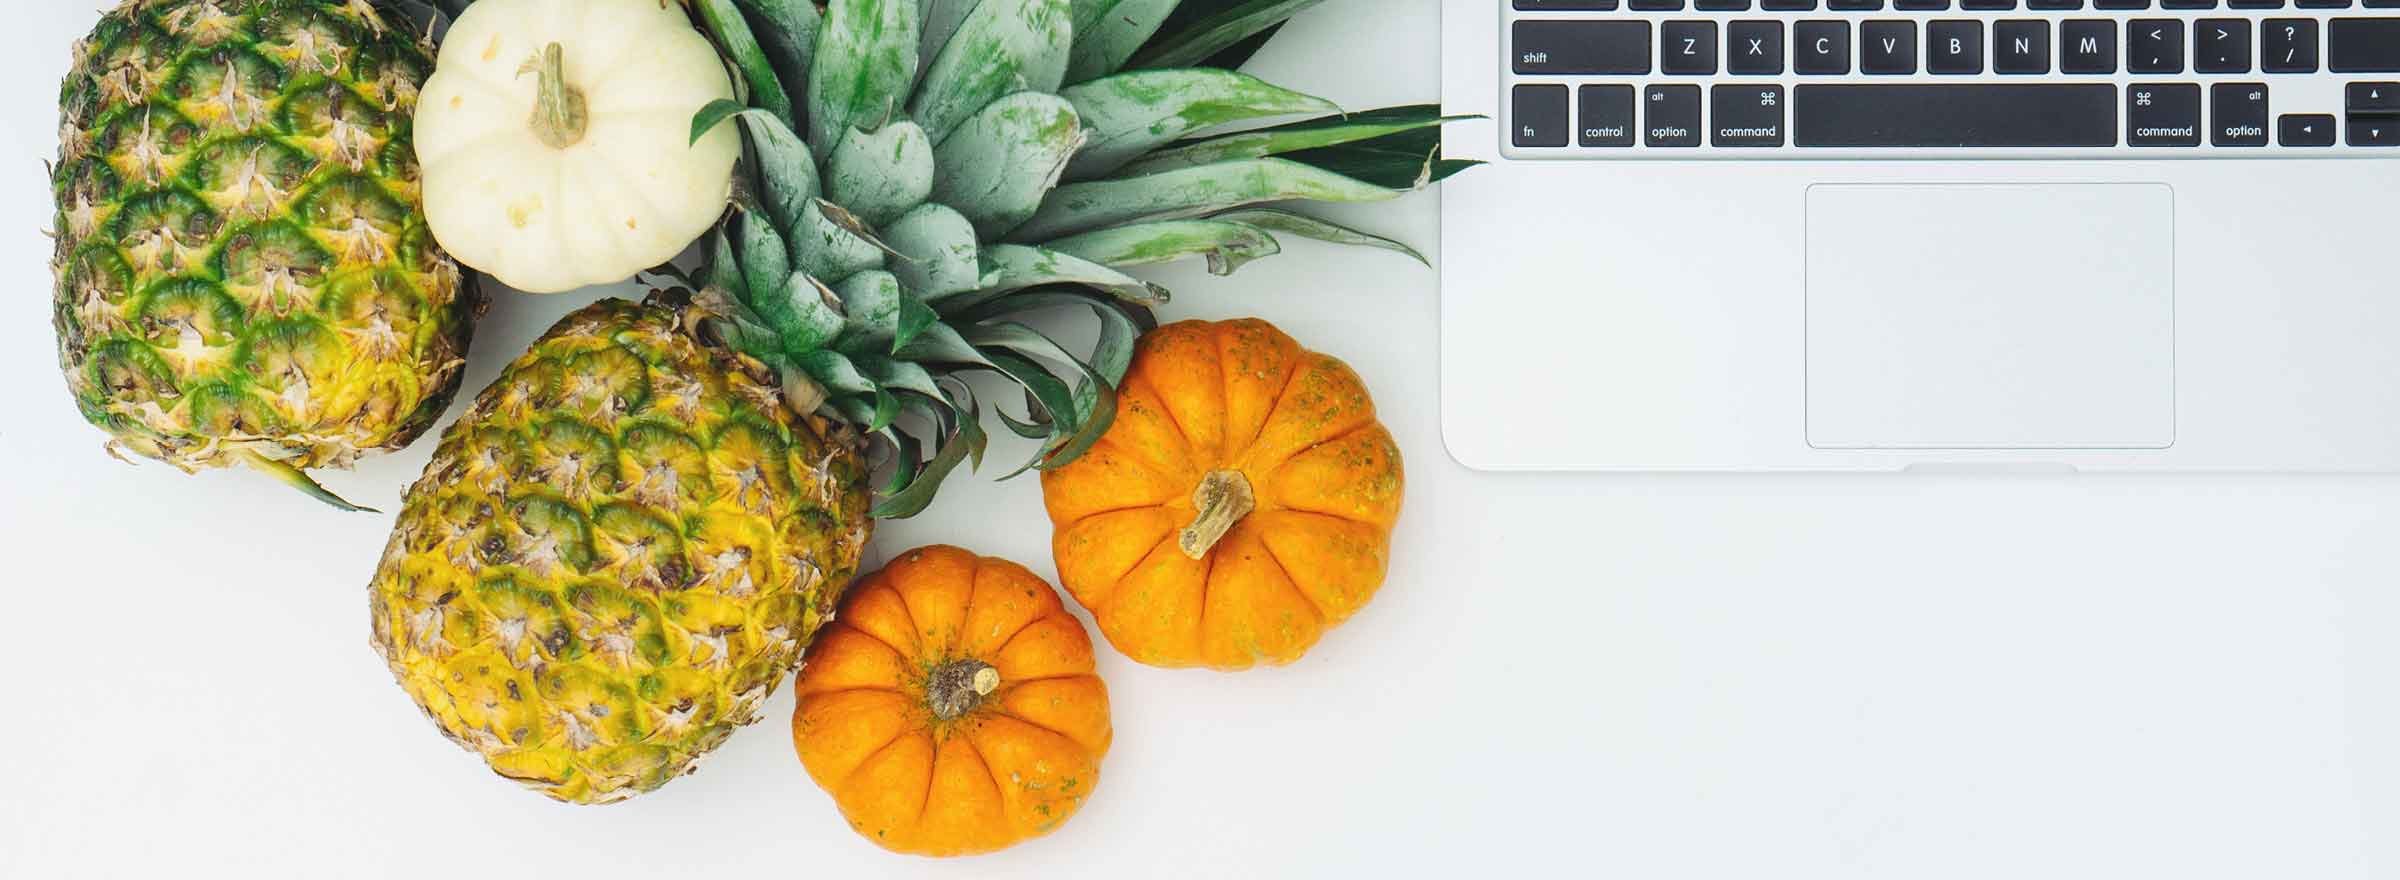 pineapples and pumpkins next to a laptop keyboard representing how Symantec helps nonprofits promote healthy eating